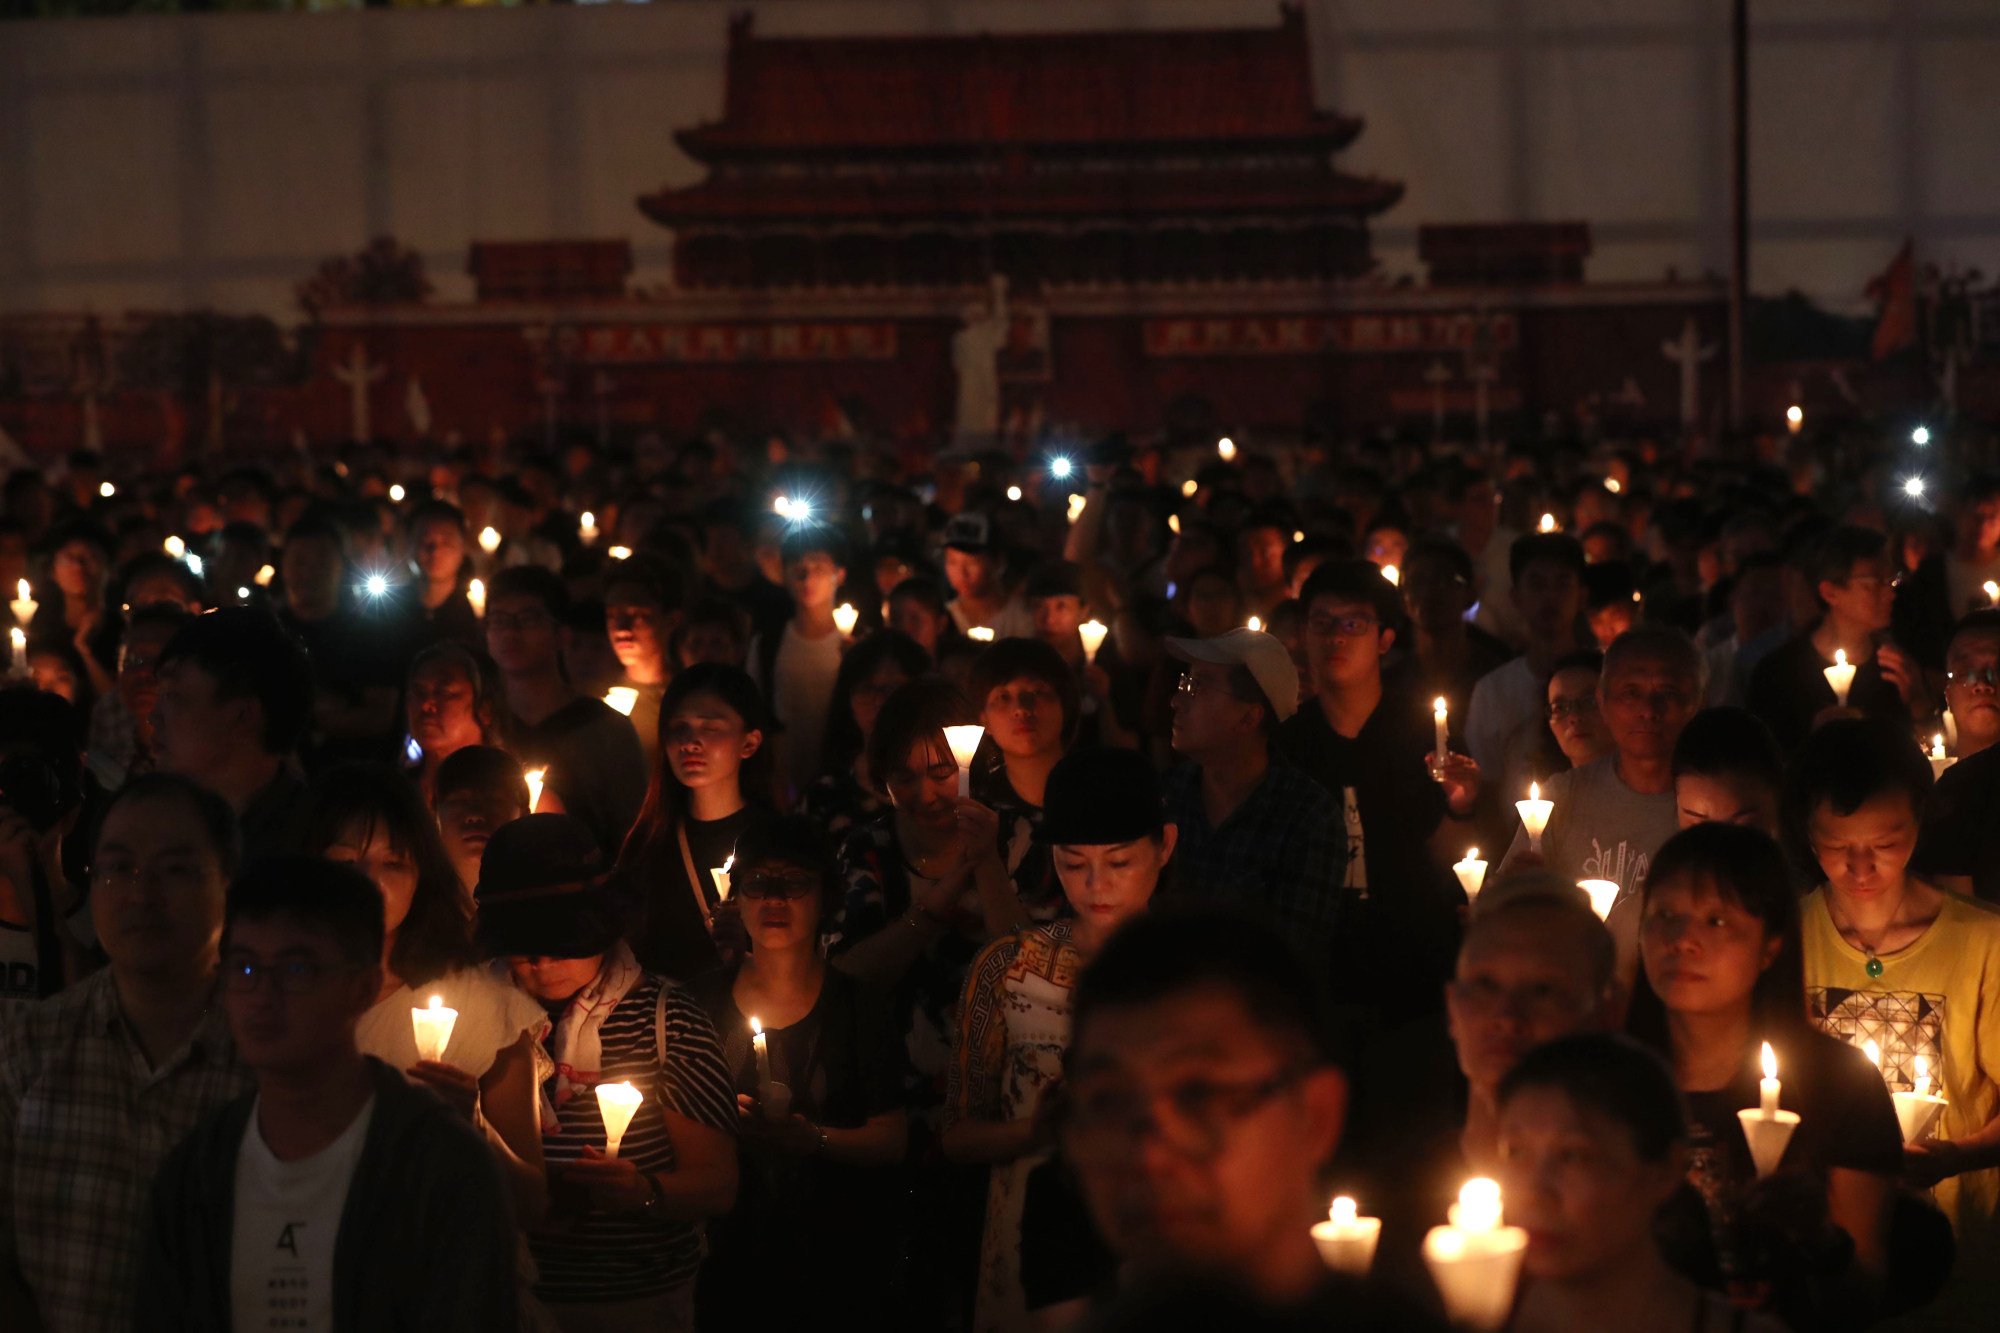 People raising their candles during the June 4 candlelight vigil at Victoria Park in 2019. Photo: Sam Tsang